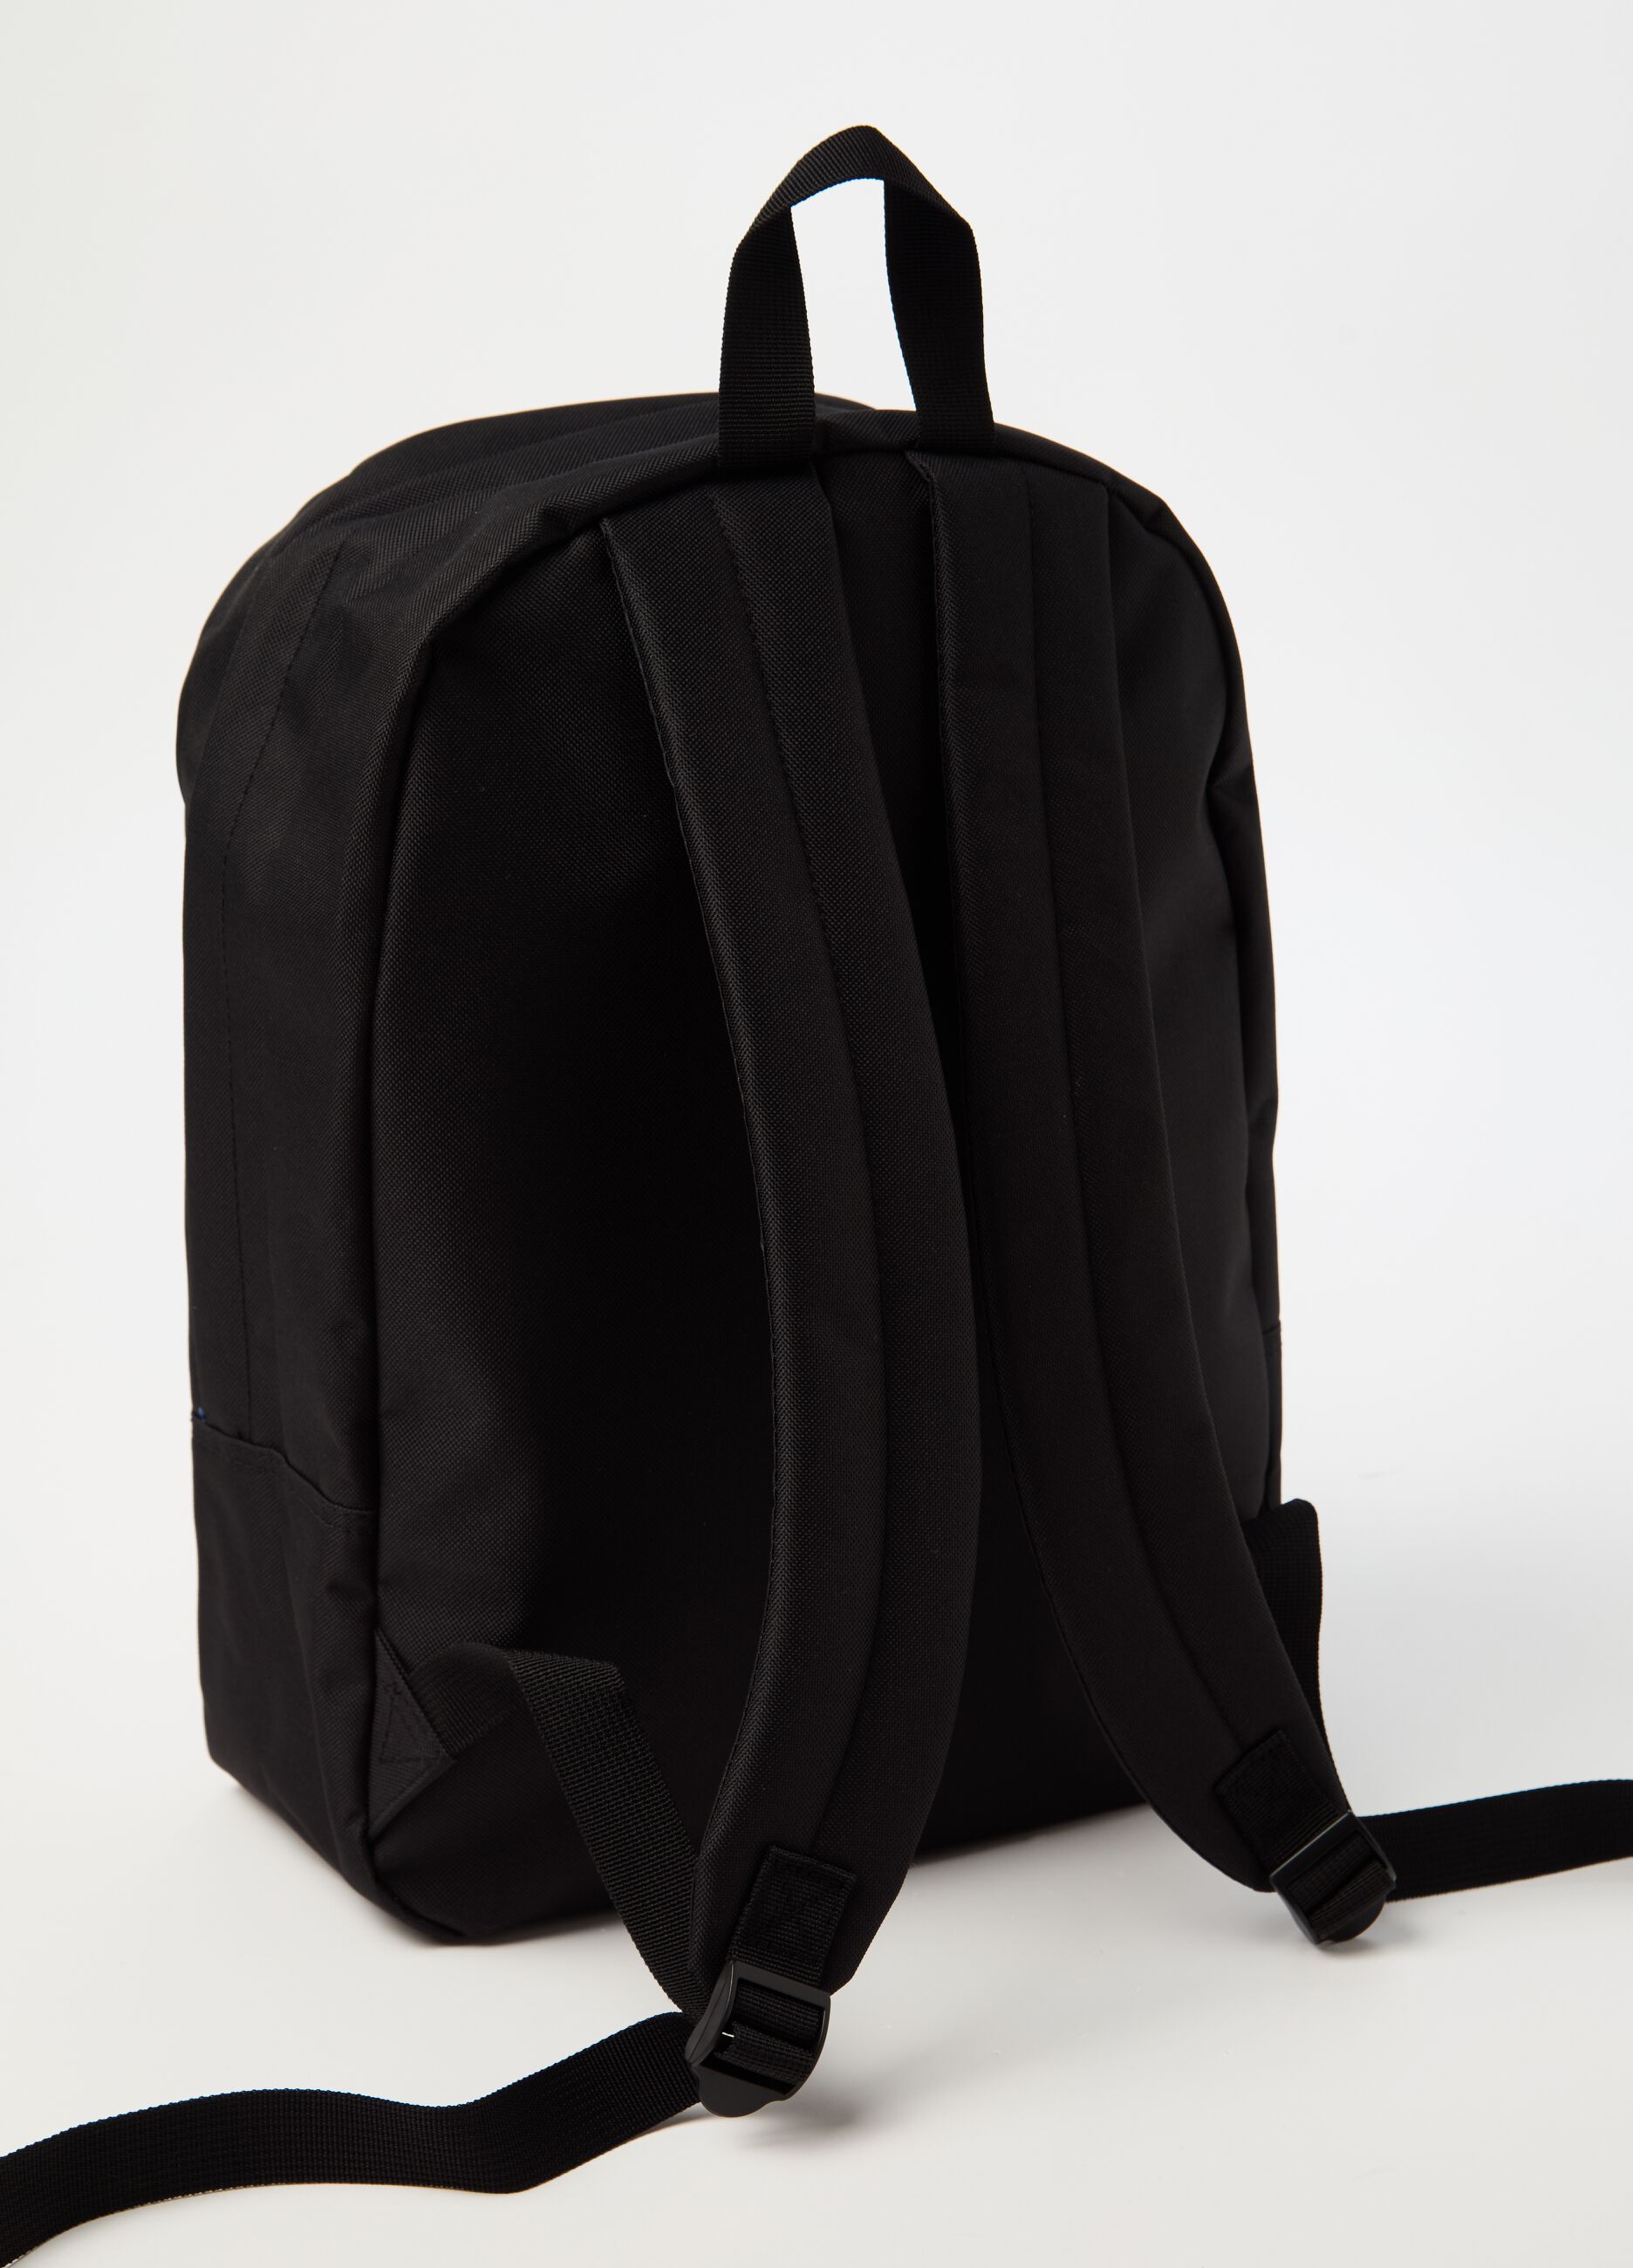 Backpack with external pocket